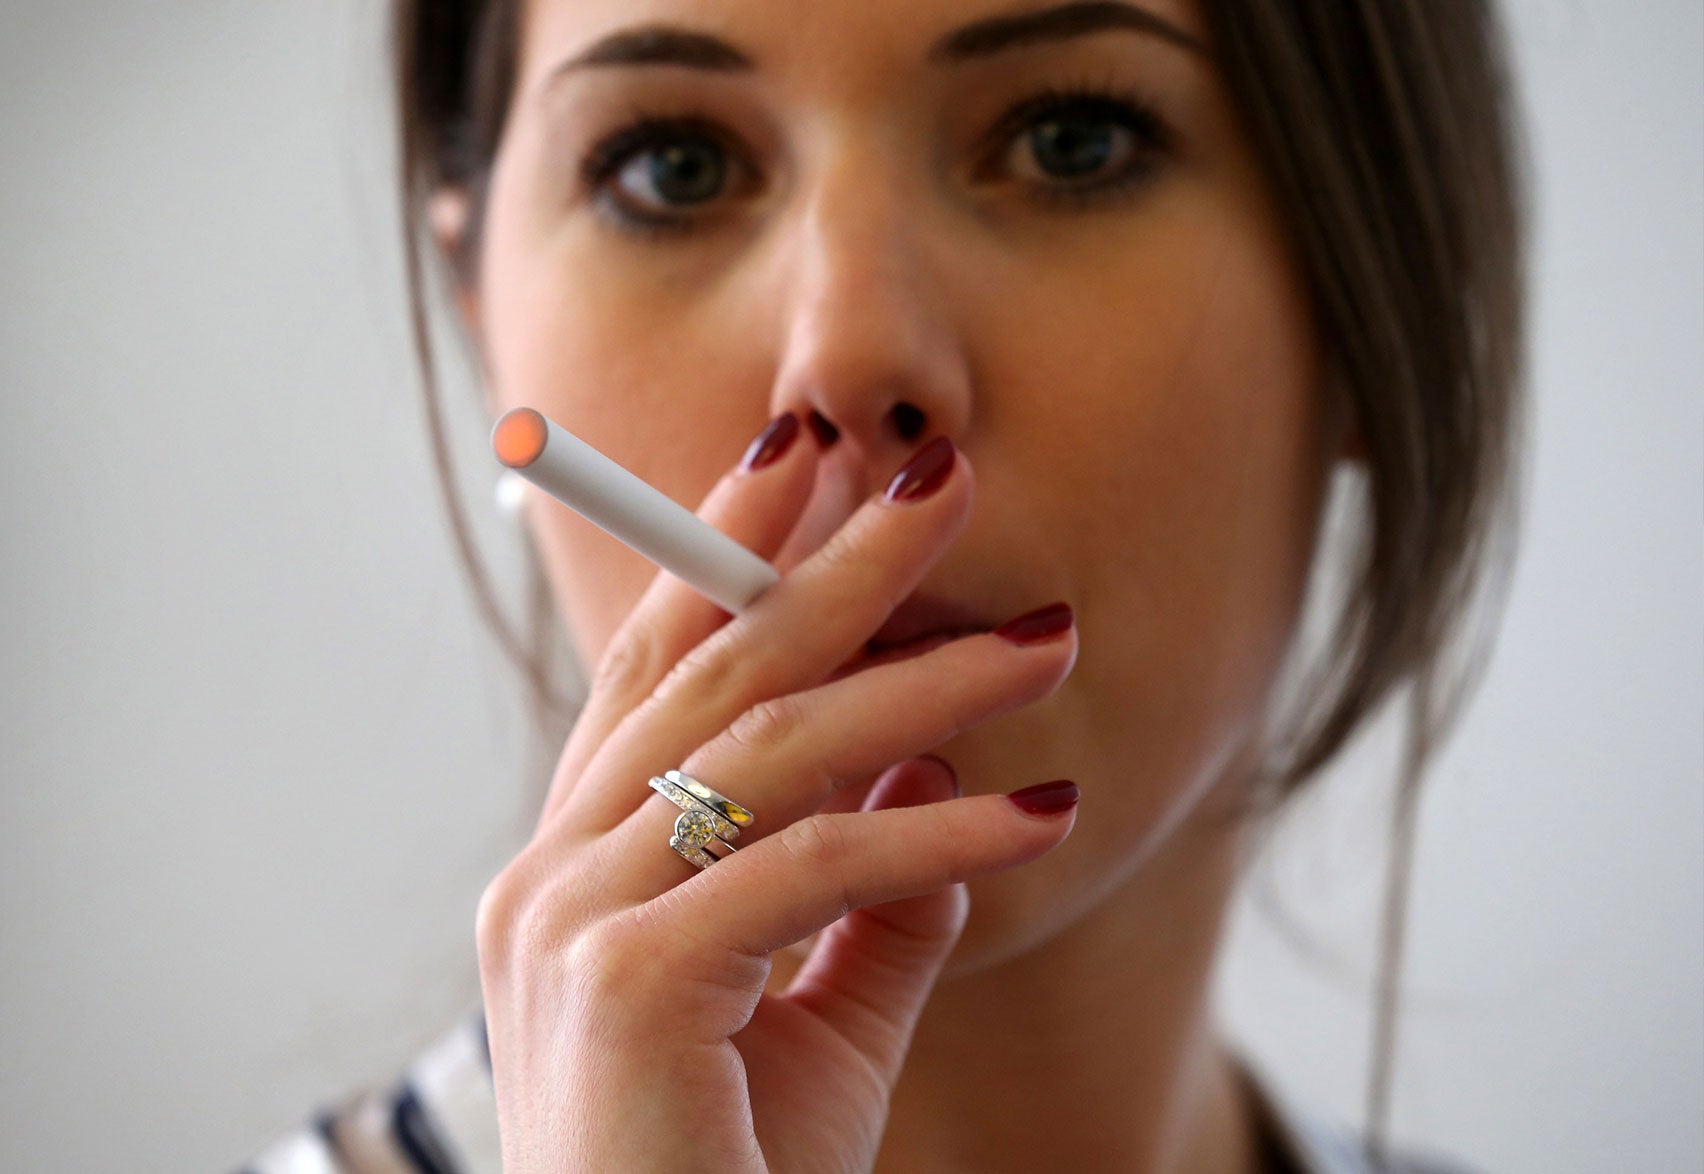 Illustration a woman smokes an e-cigarette on April 2, 2014 in London, England